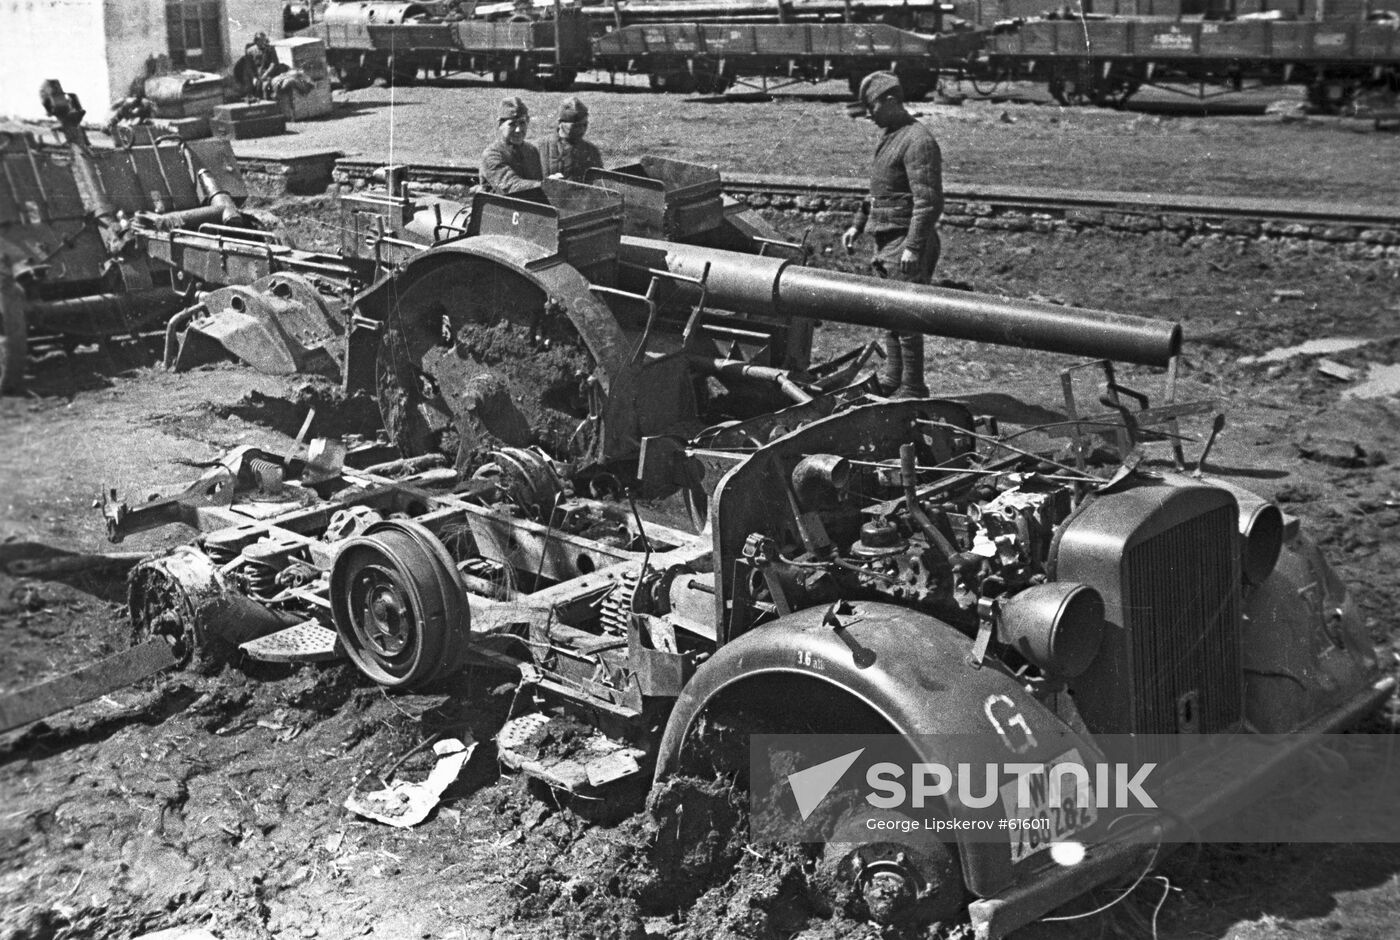 Destroyed and abandoned German equipment